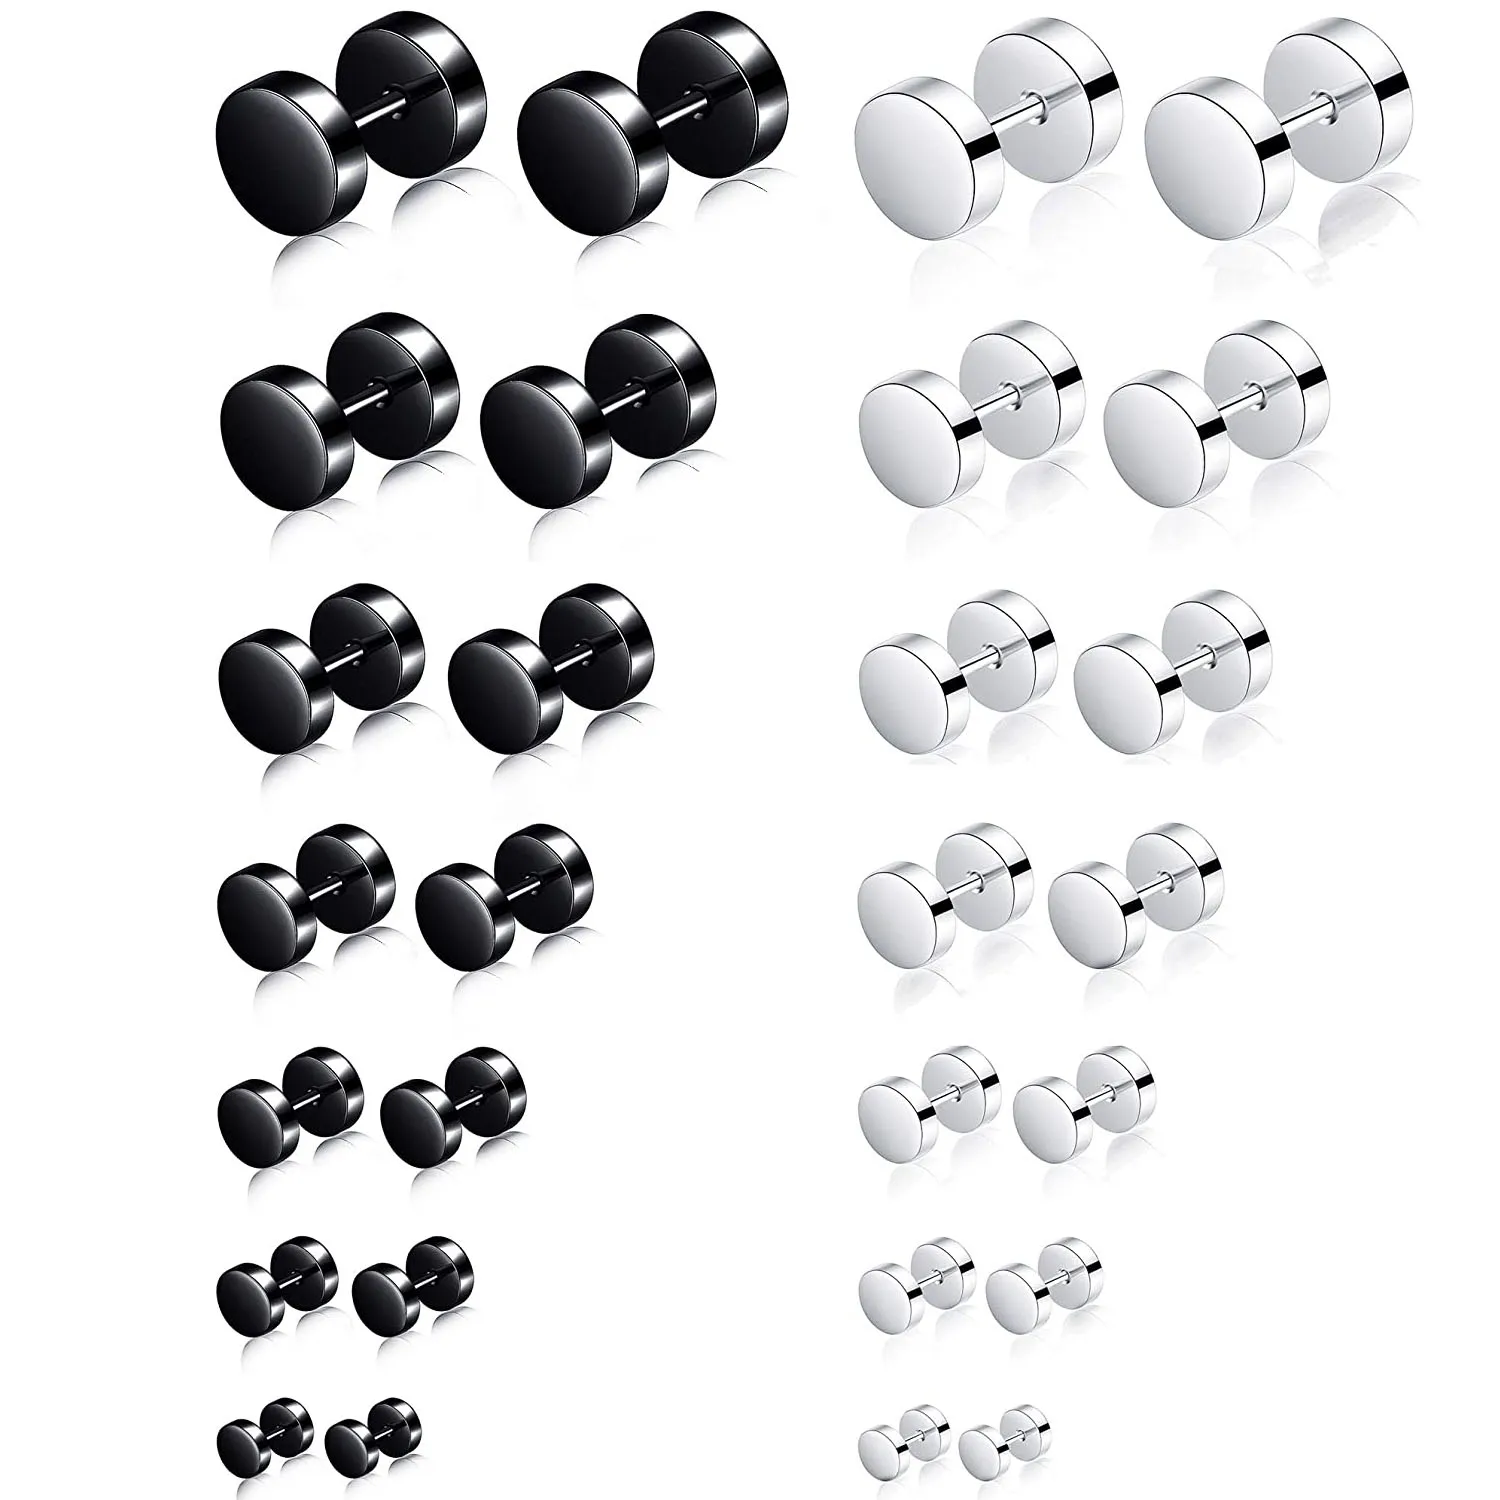 Tornito 14 Pairs Stainless Steel Ball Stud Earrings Barbell Cartilage Tragus Helix Ear Piercing For Men Women 2-8mm Silver Black 